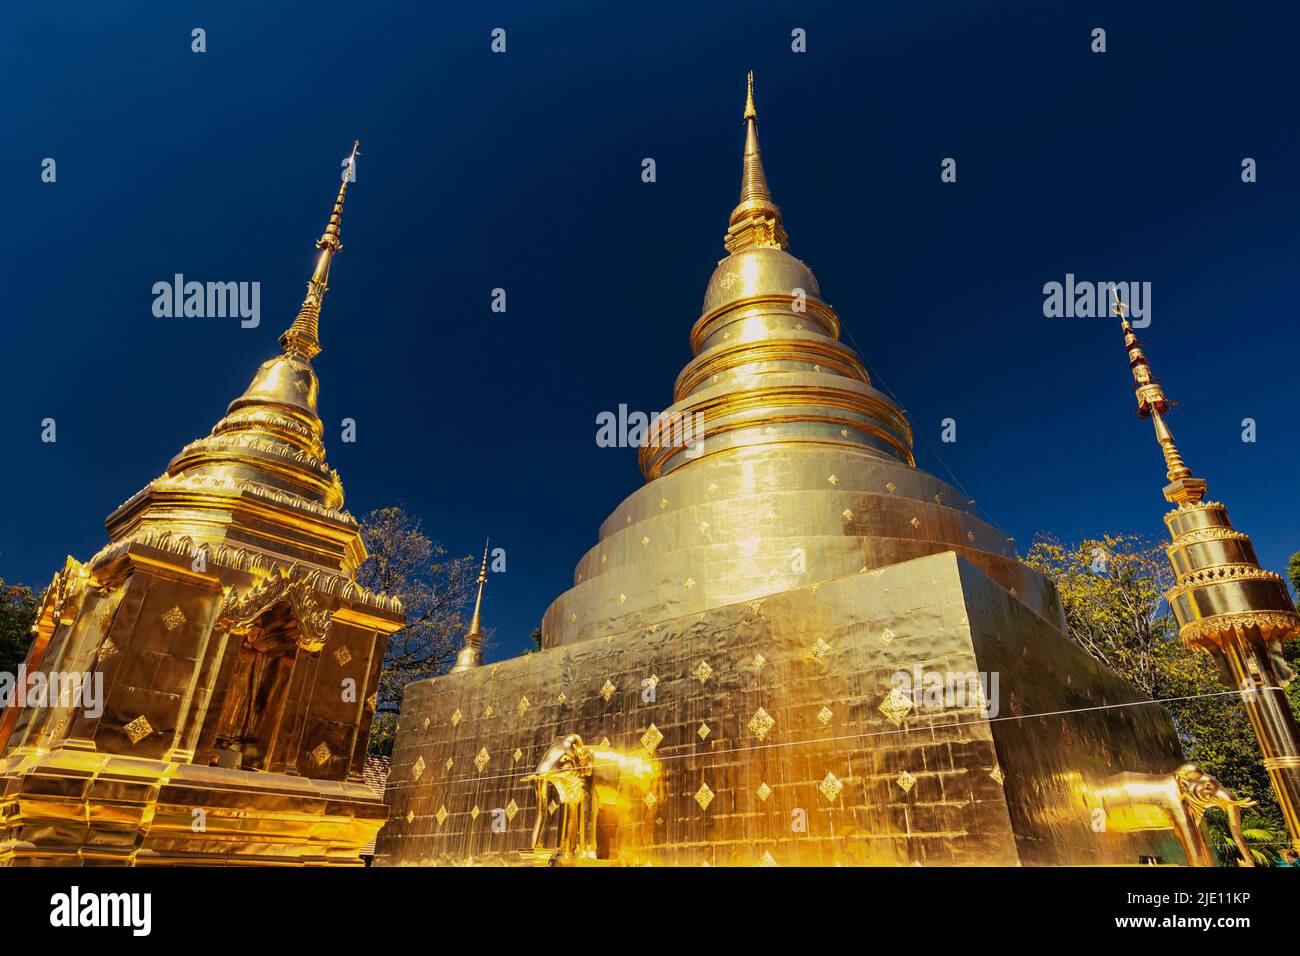 The gilded stupas of the Wat Phra Singh temple in Chiang Mai, Thailand Stock Photo